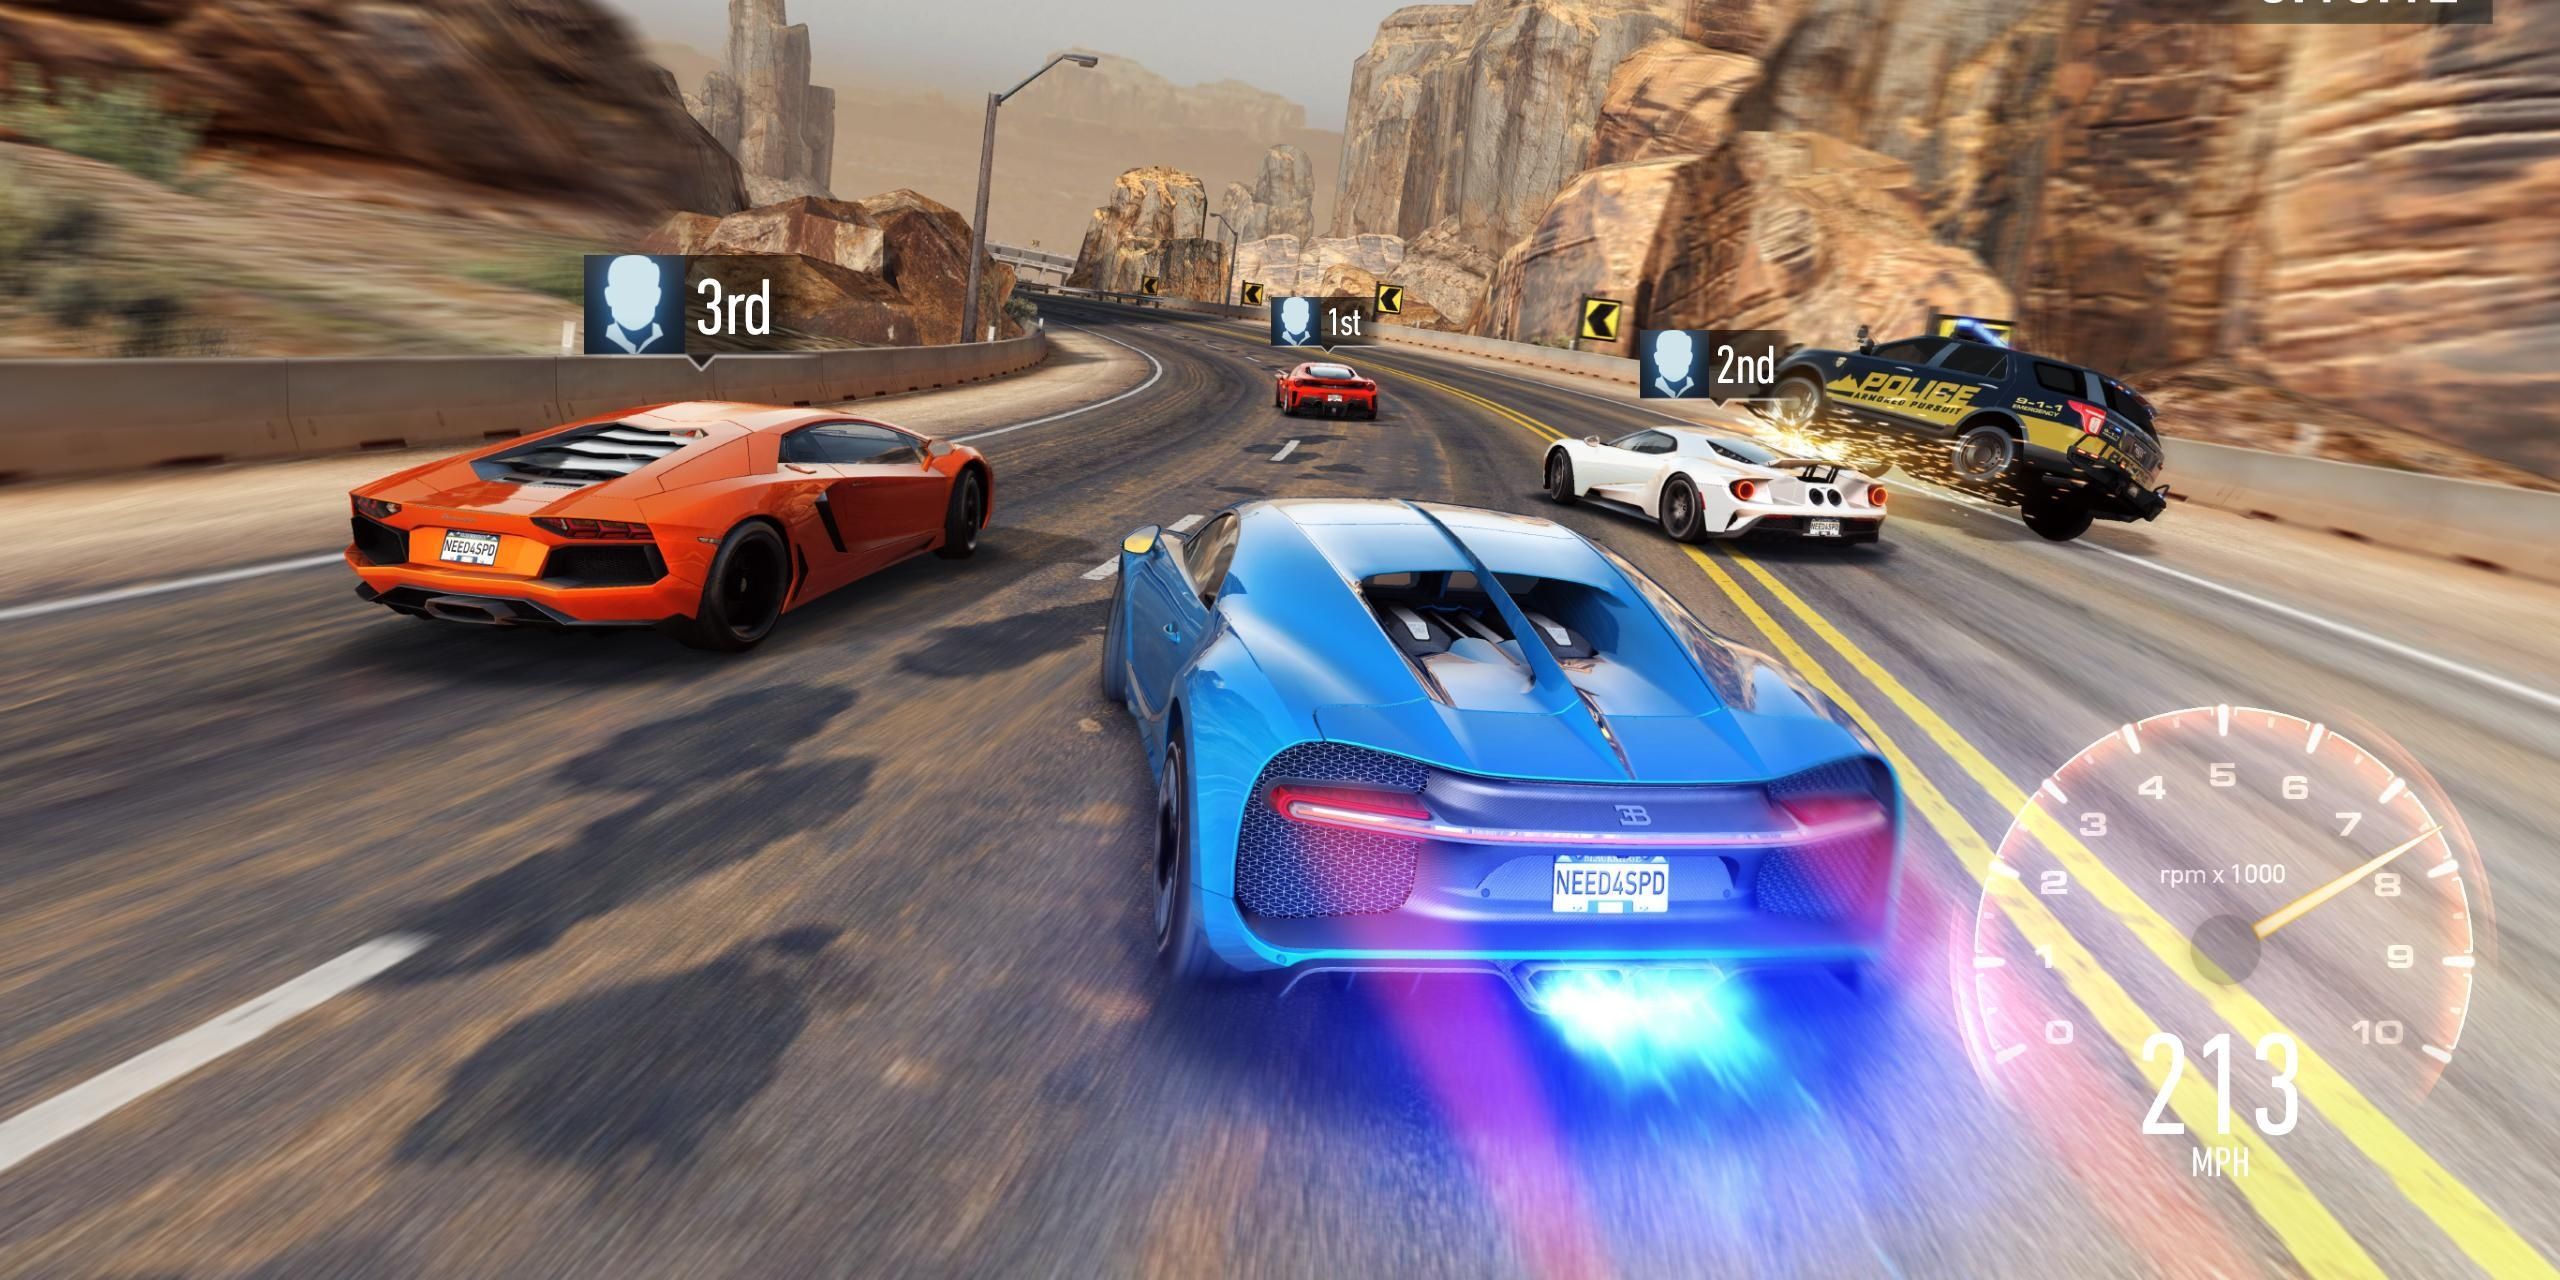 The 10 Best Racing Games Ever Made (According To Metacritic)